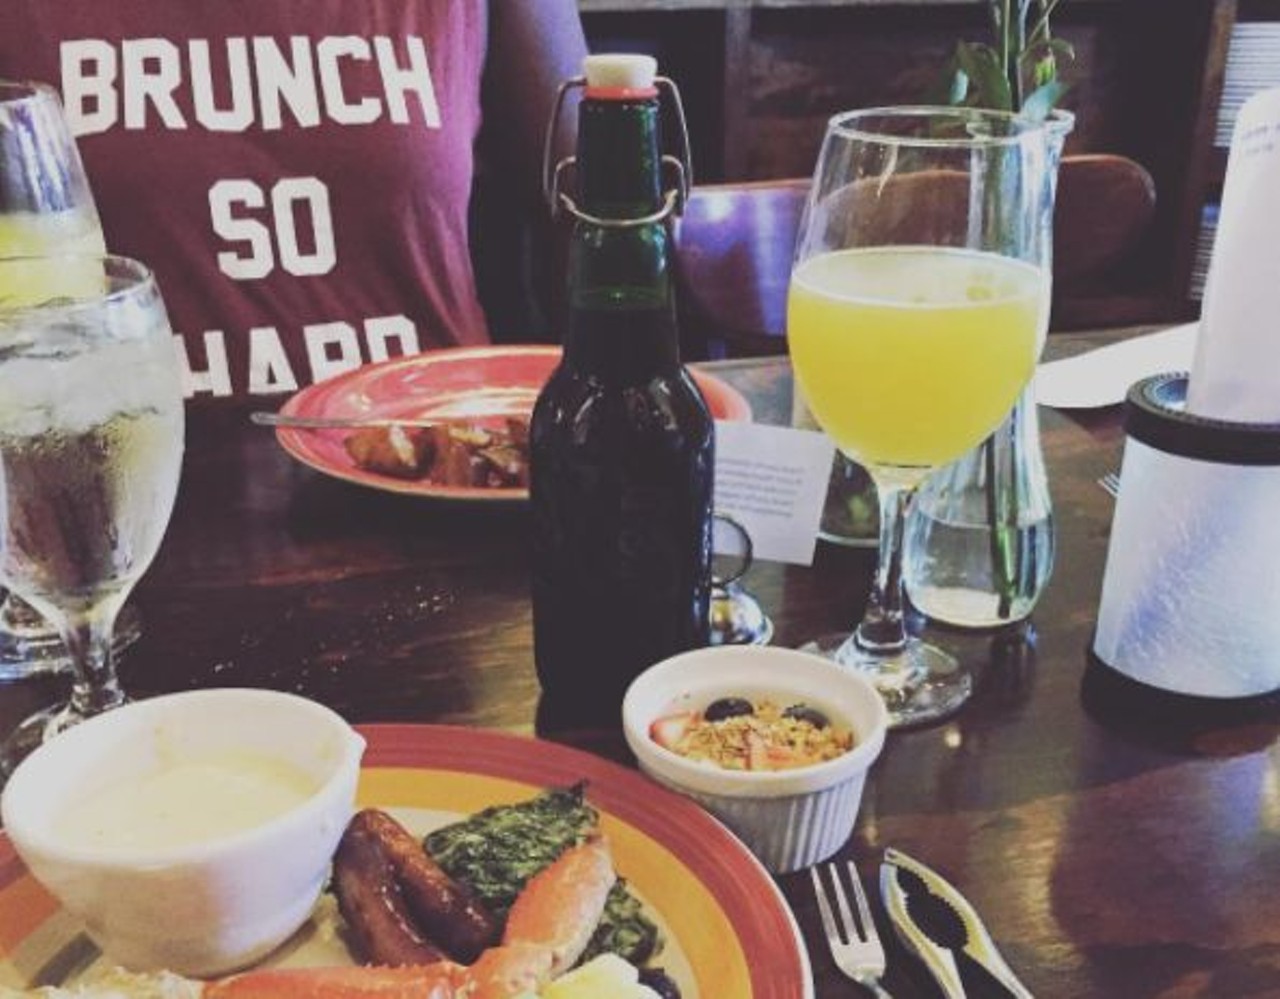 Santiagos Bodega
$40 gets you the brunch buffet, along with as many mimosas as you can drink. Happens every Saturday and Sunday from 10:30 a.m. to 2:30 p.m. 
802 Virginia Drive, 407-412-6979
Photo via lovecarlyn/Instagram